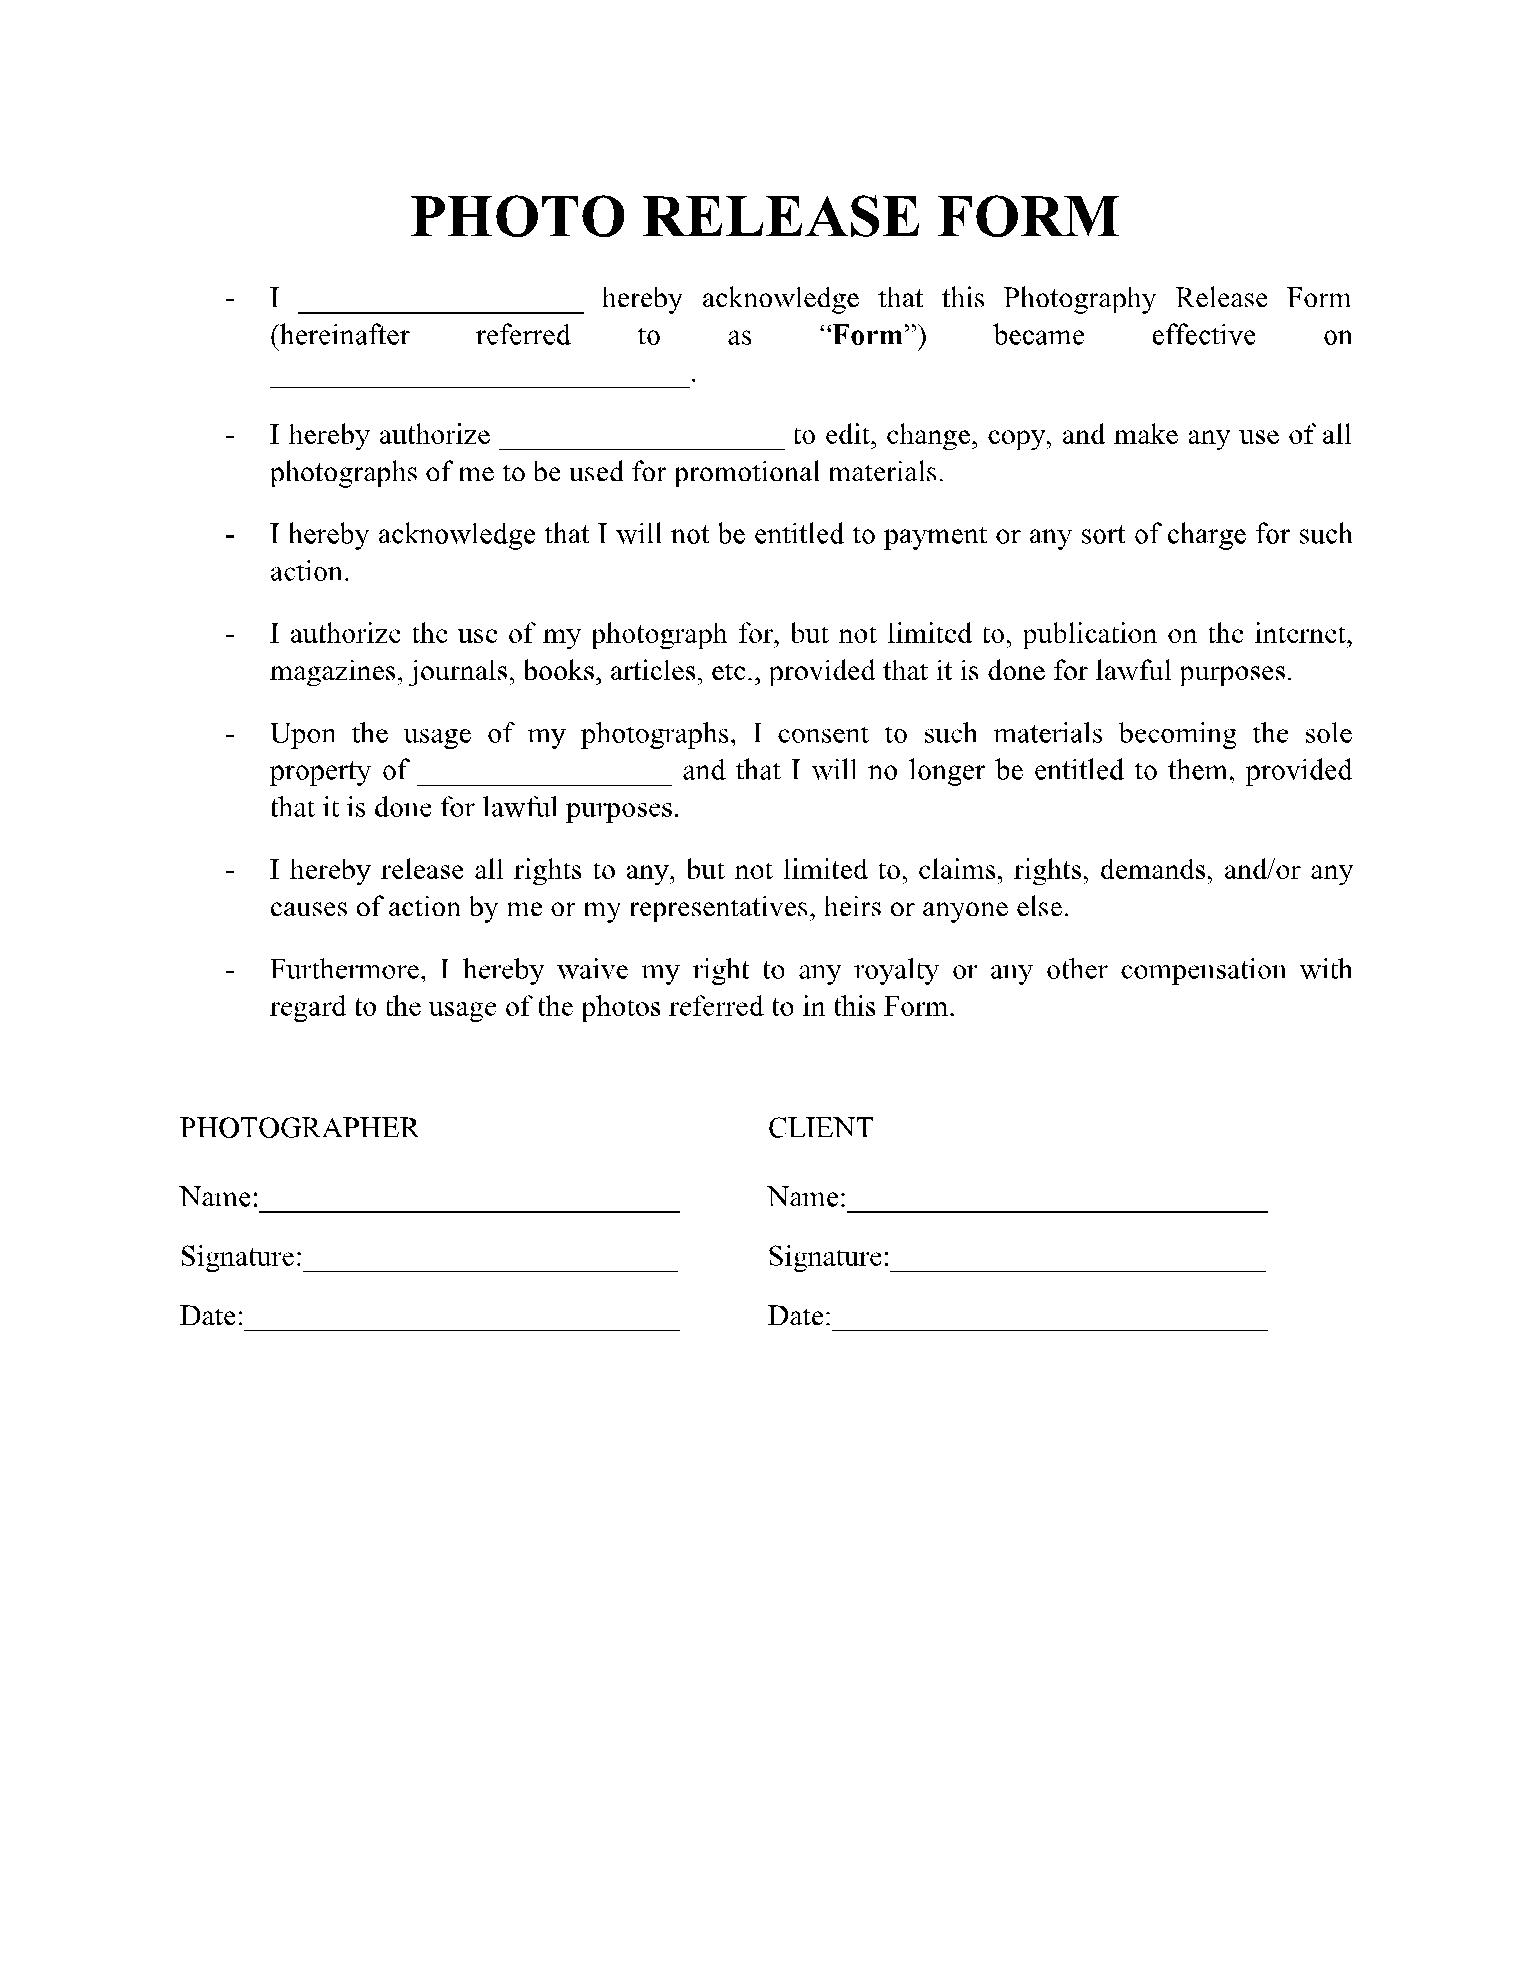 Photo Release Form In 2021 (Free Download) - Cocosign inside Free Printable Photo Release Form